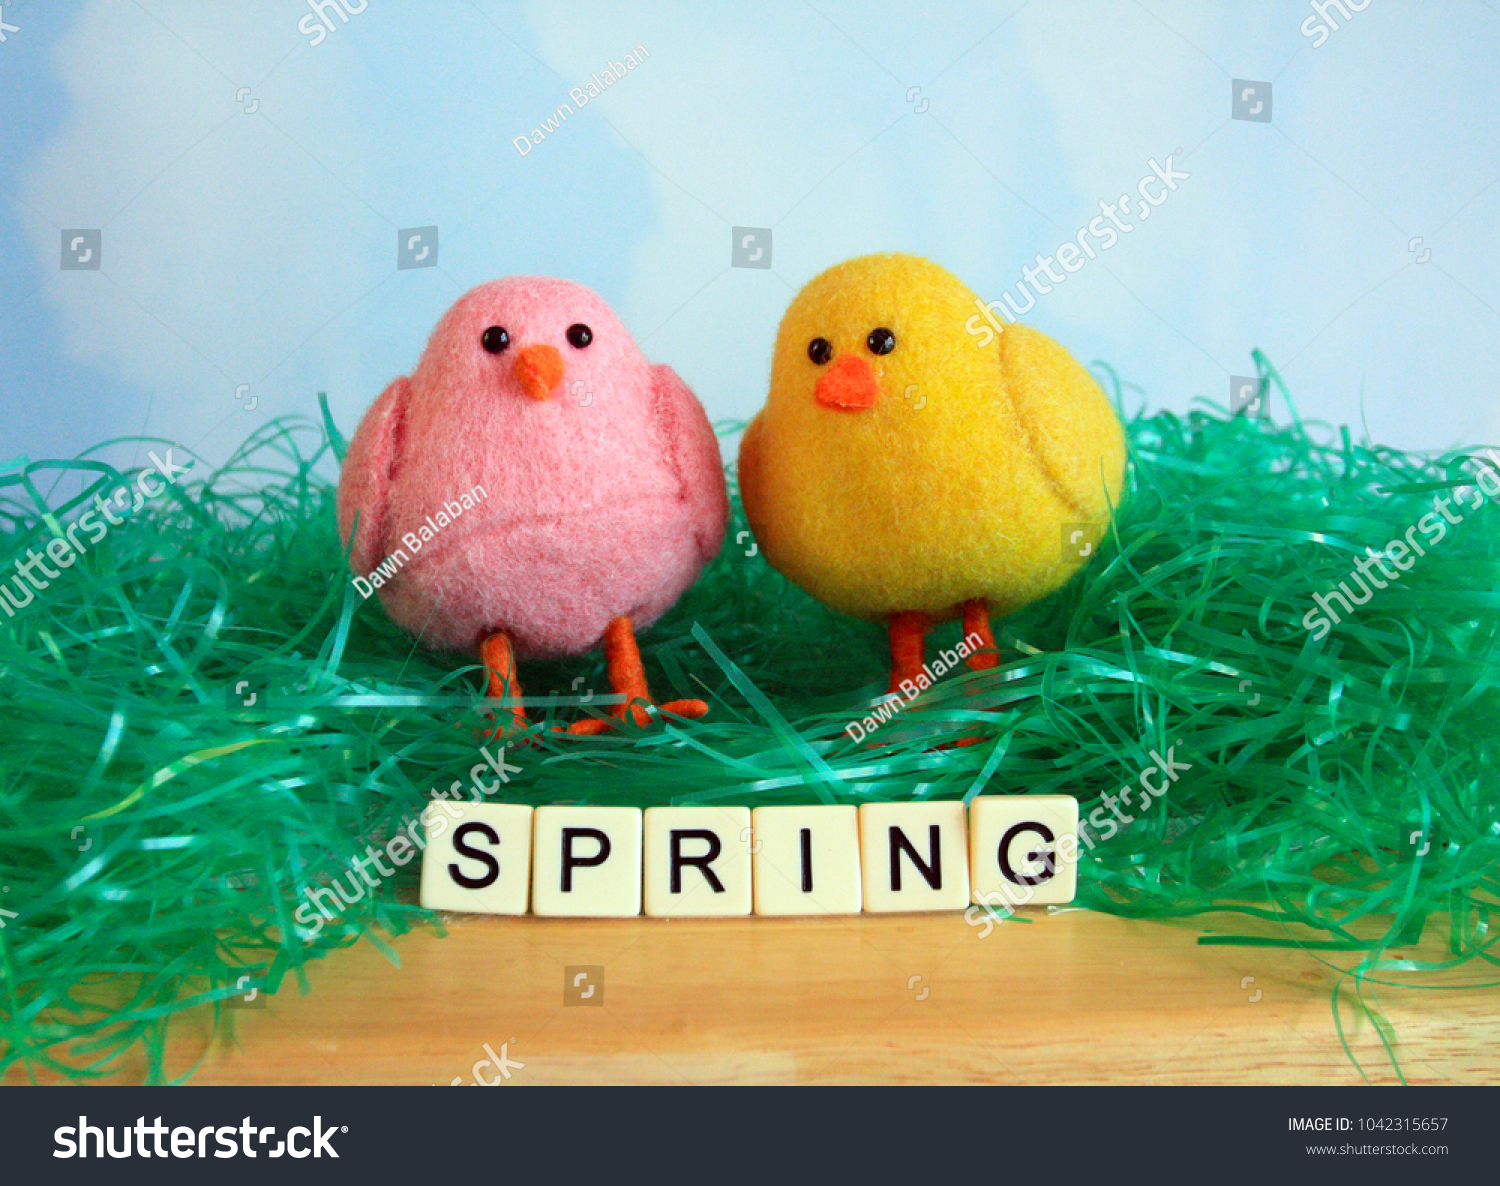 two chicks pink and yellow on green Easter grass and wood with the words spring spelled out in front of the chicks on a sky and clouds background #1042315657